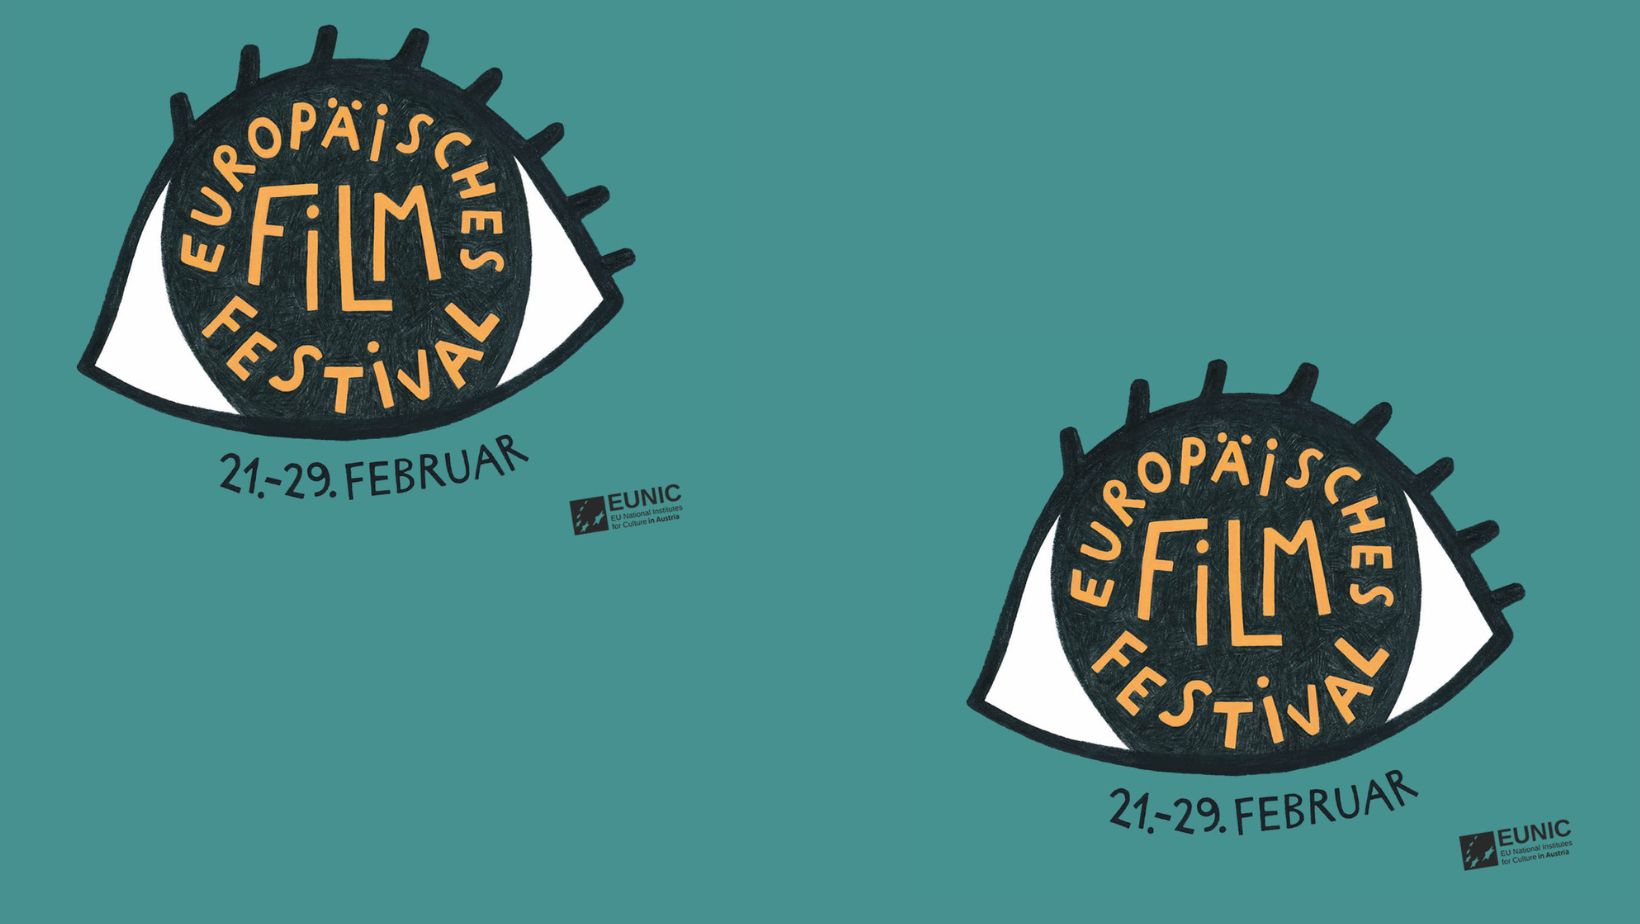 Romania represented by two films at the first edition of the European Film Festival in Vienna